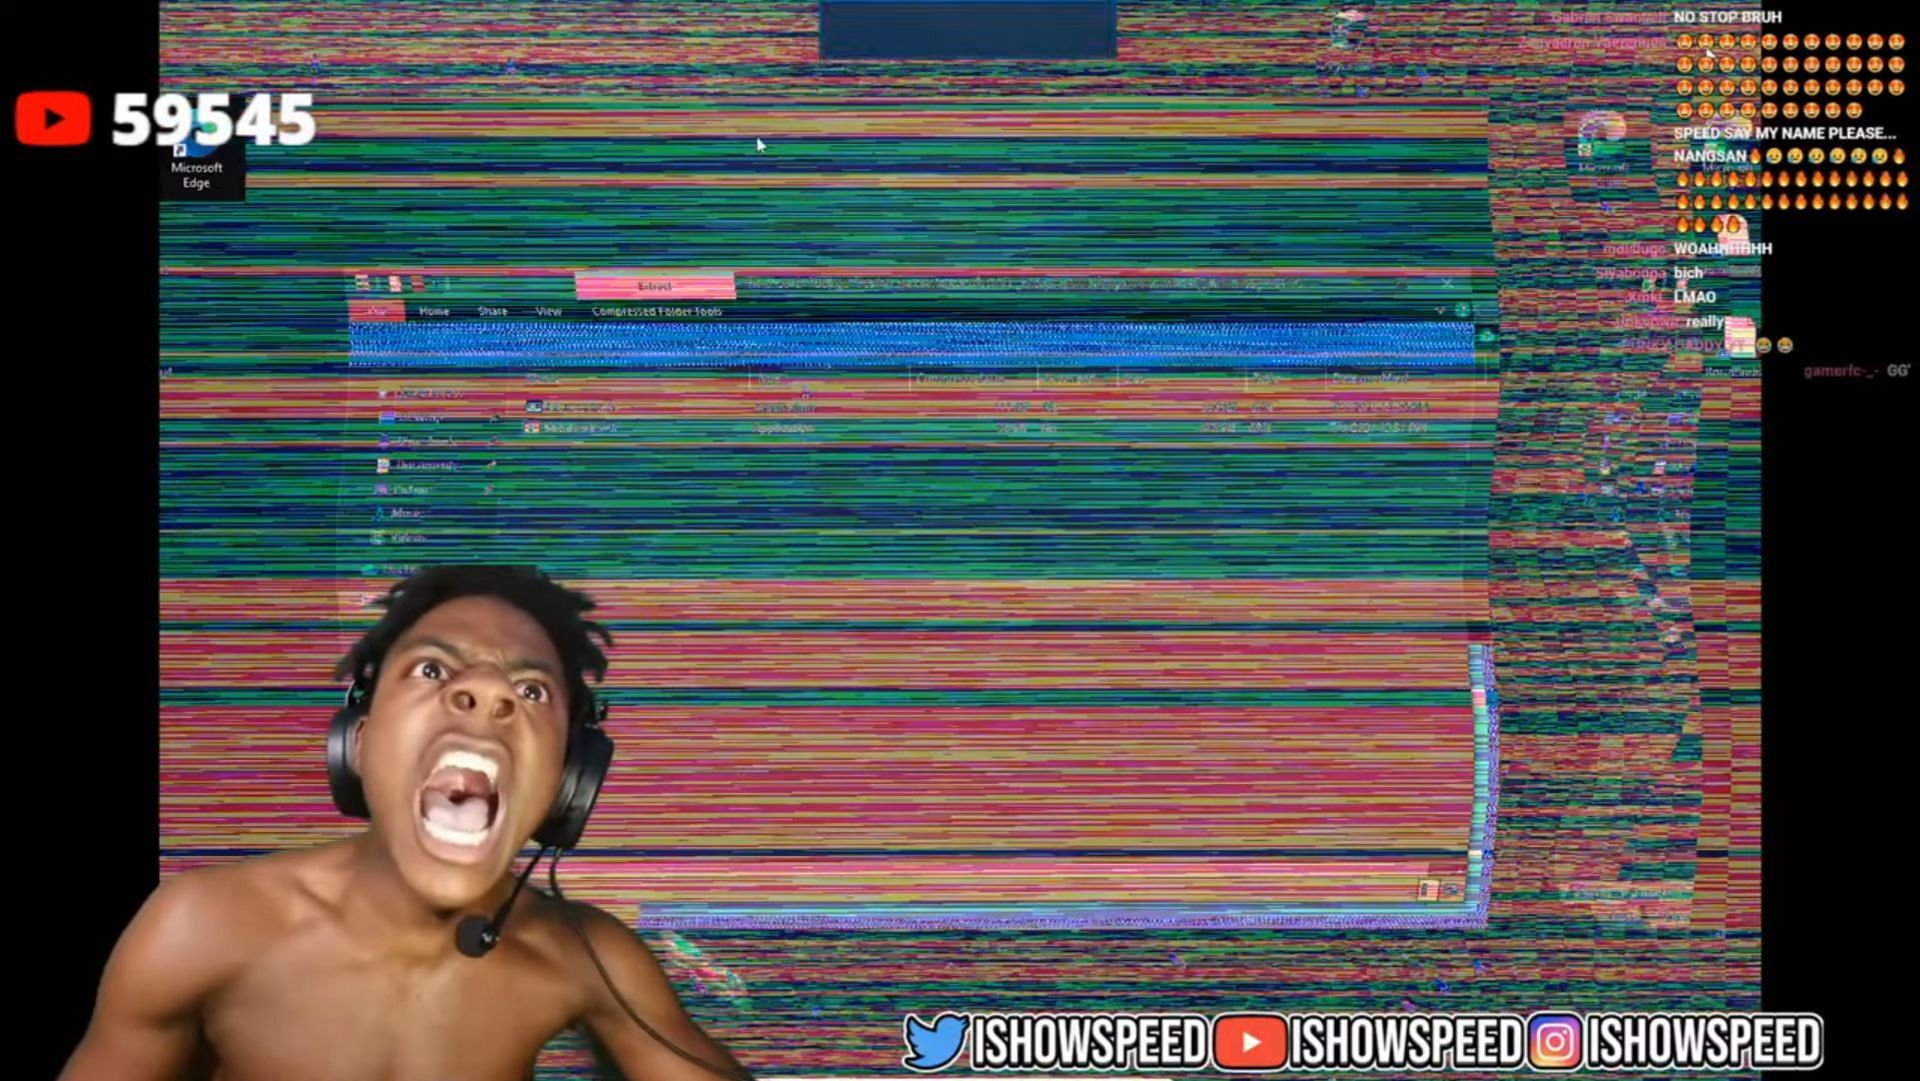 IShowSpeed&rsquo;s PC gets hacked live on stream (Image via Speedy Boykins/YouTube)